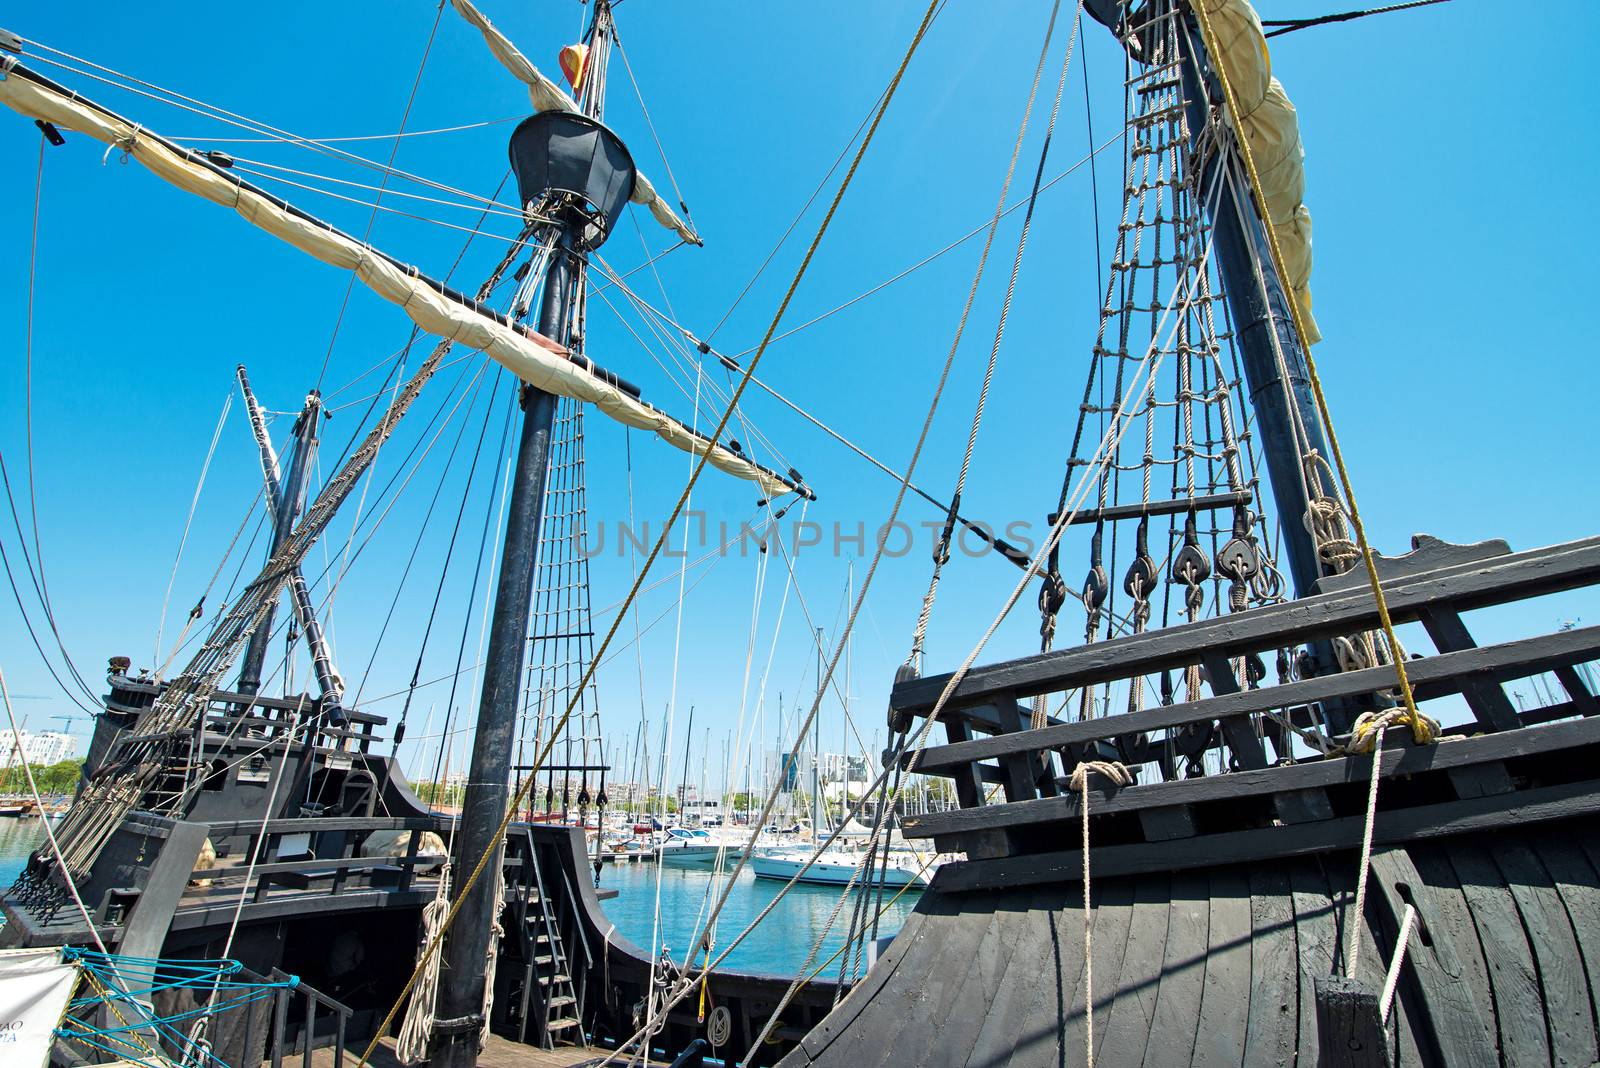 Old ship, tourist attraction in Barcelona